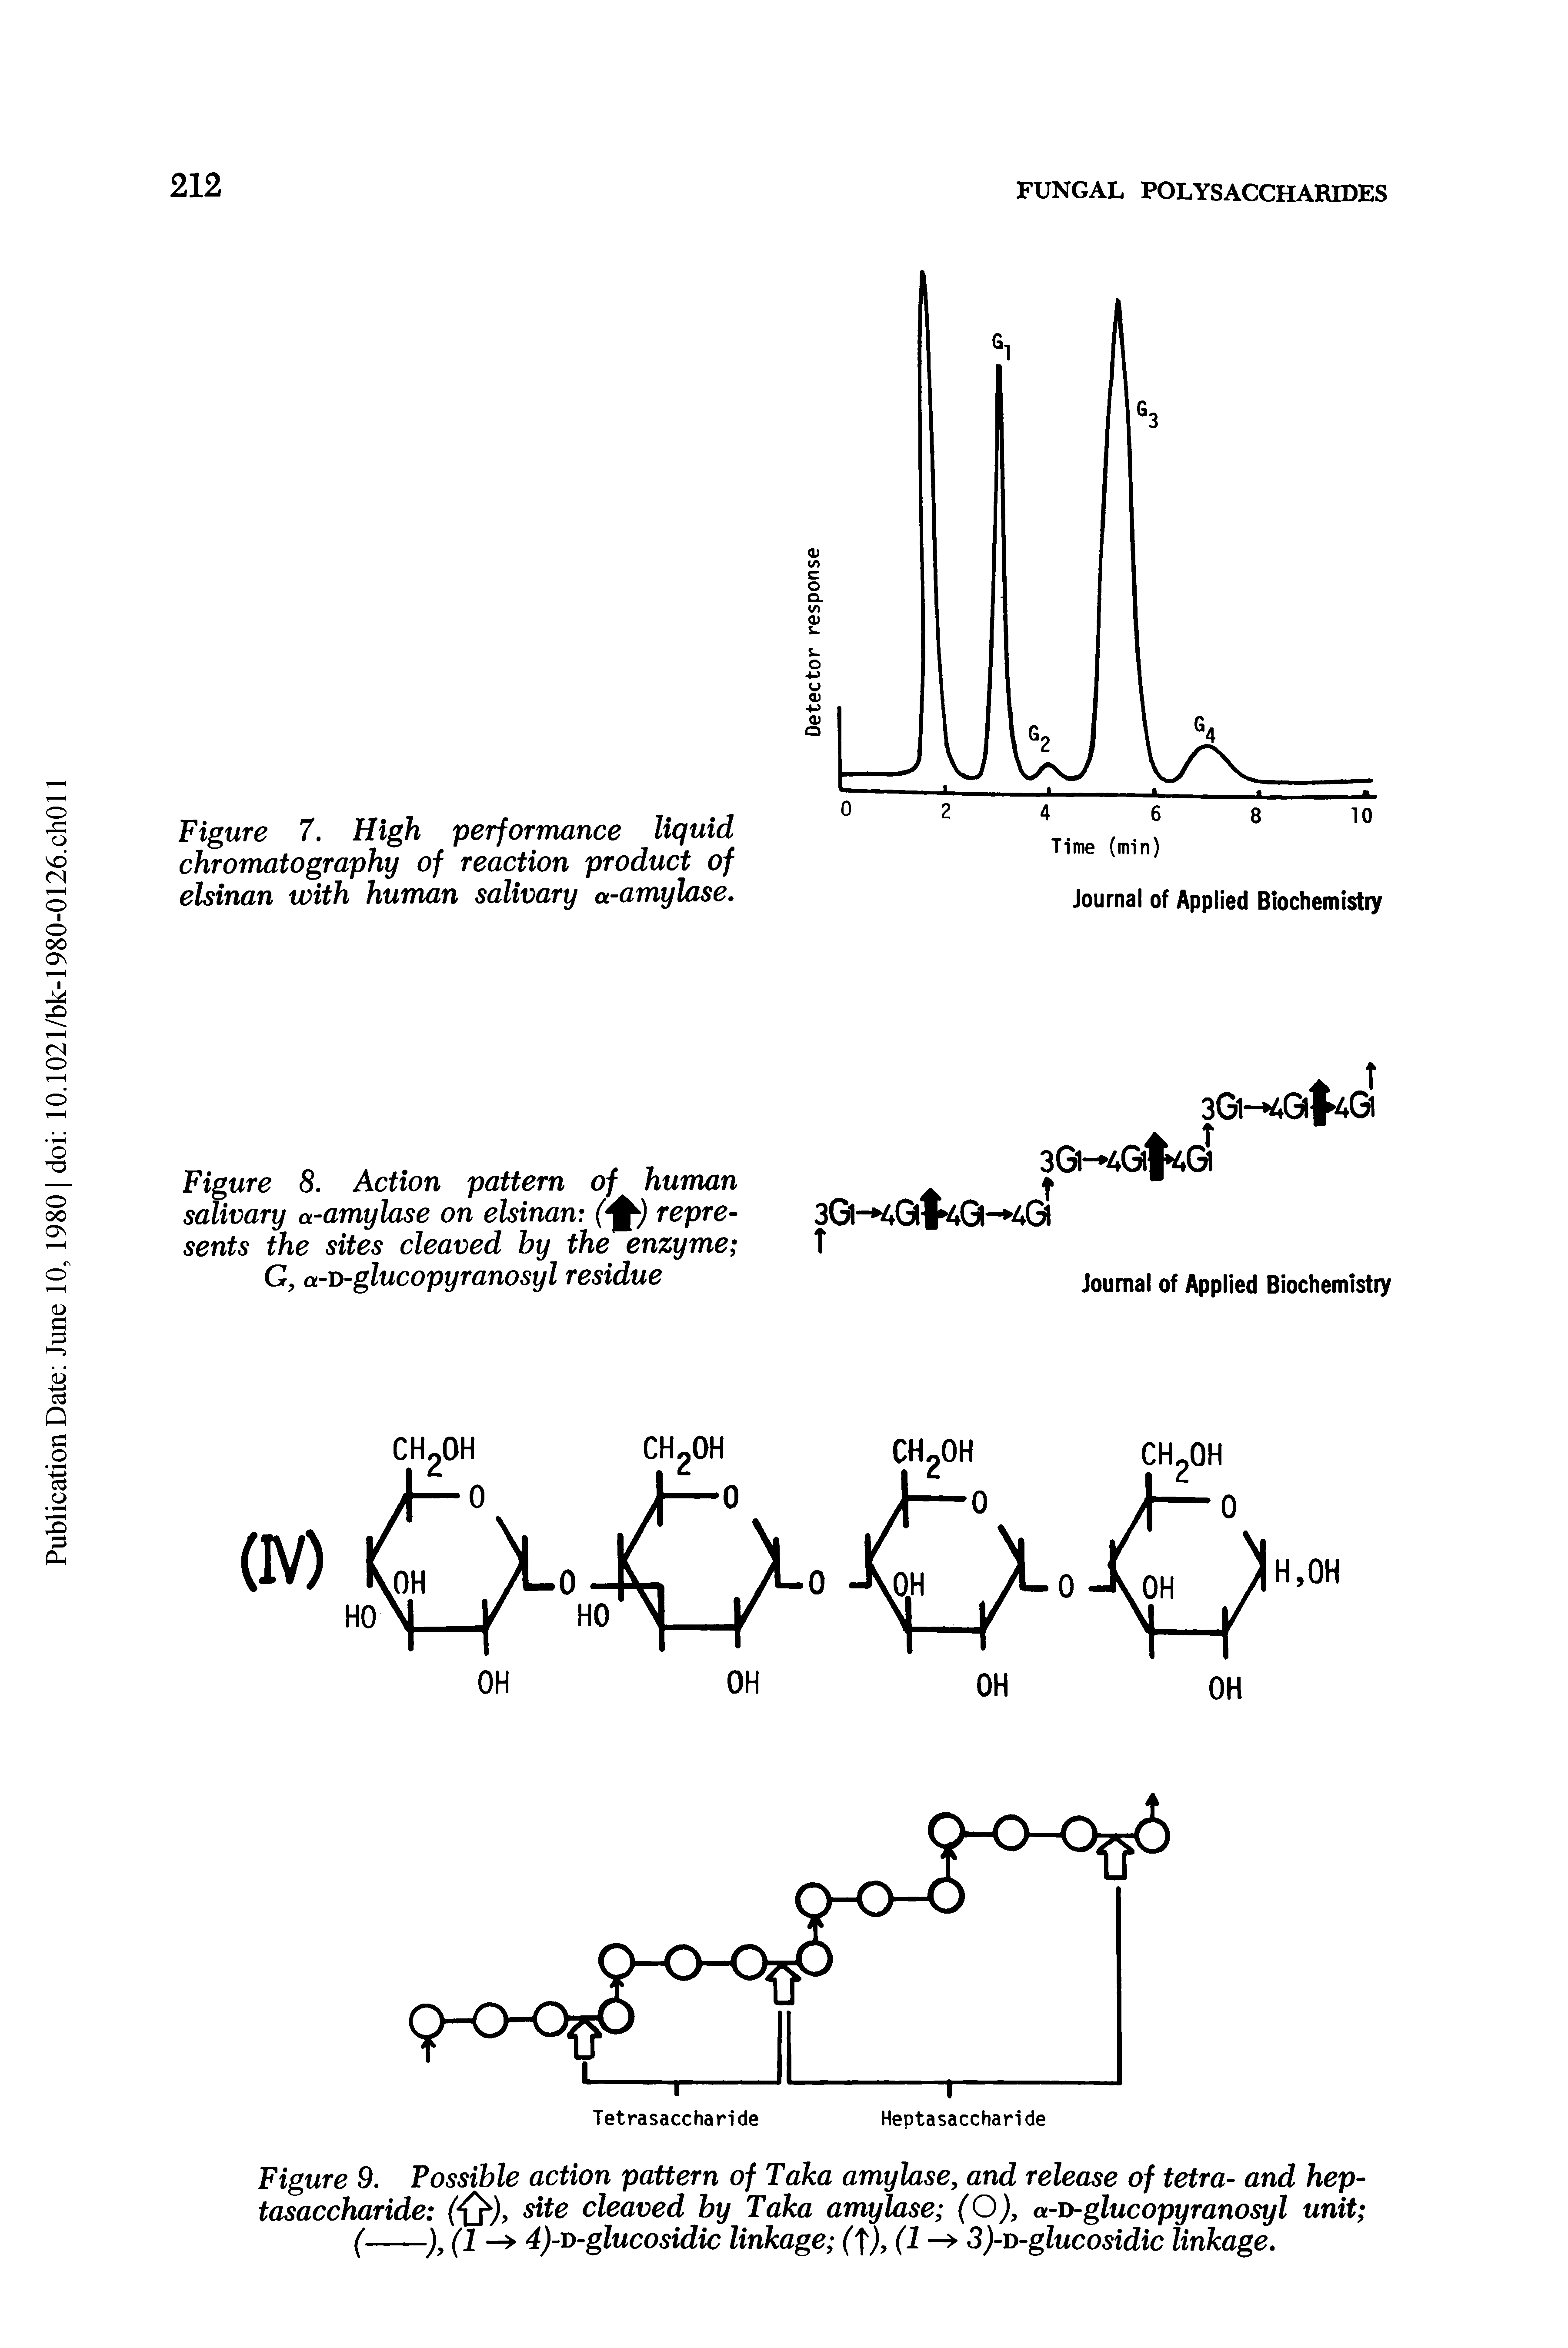 Figure 7. High performance liquid chromatography of reaction product of elsinan with human salivary a-amylase.